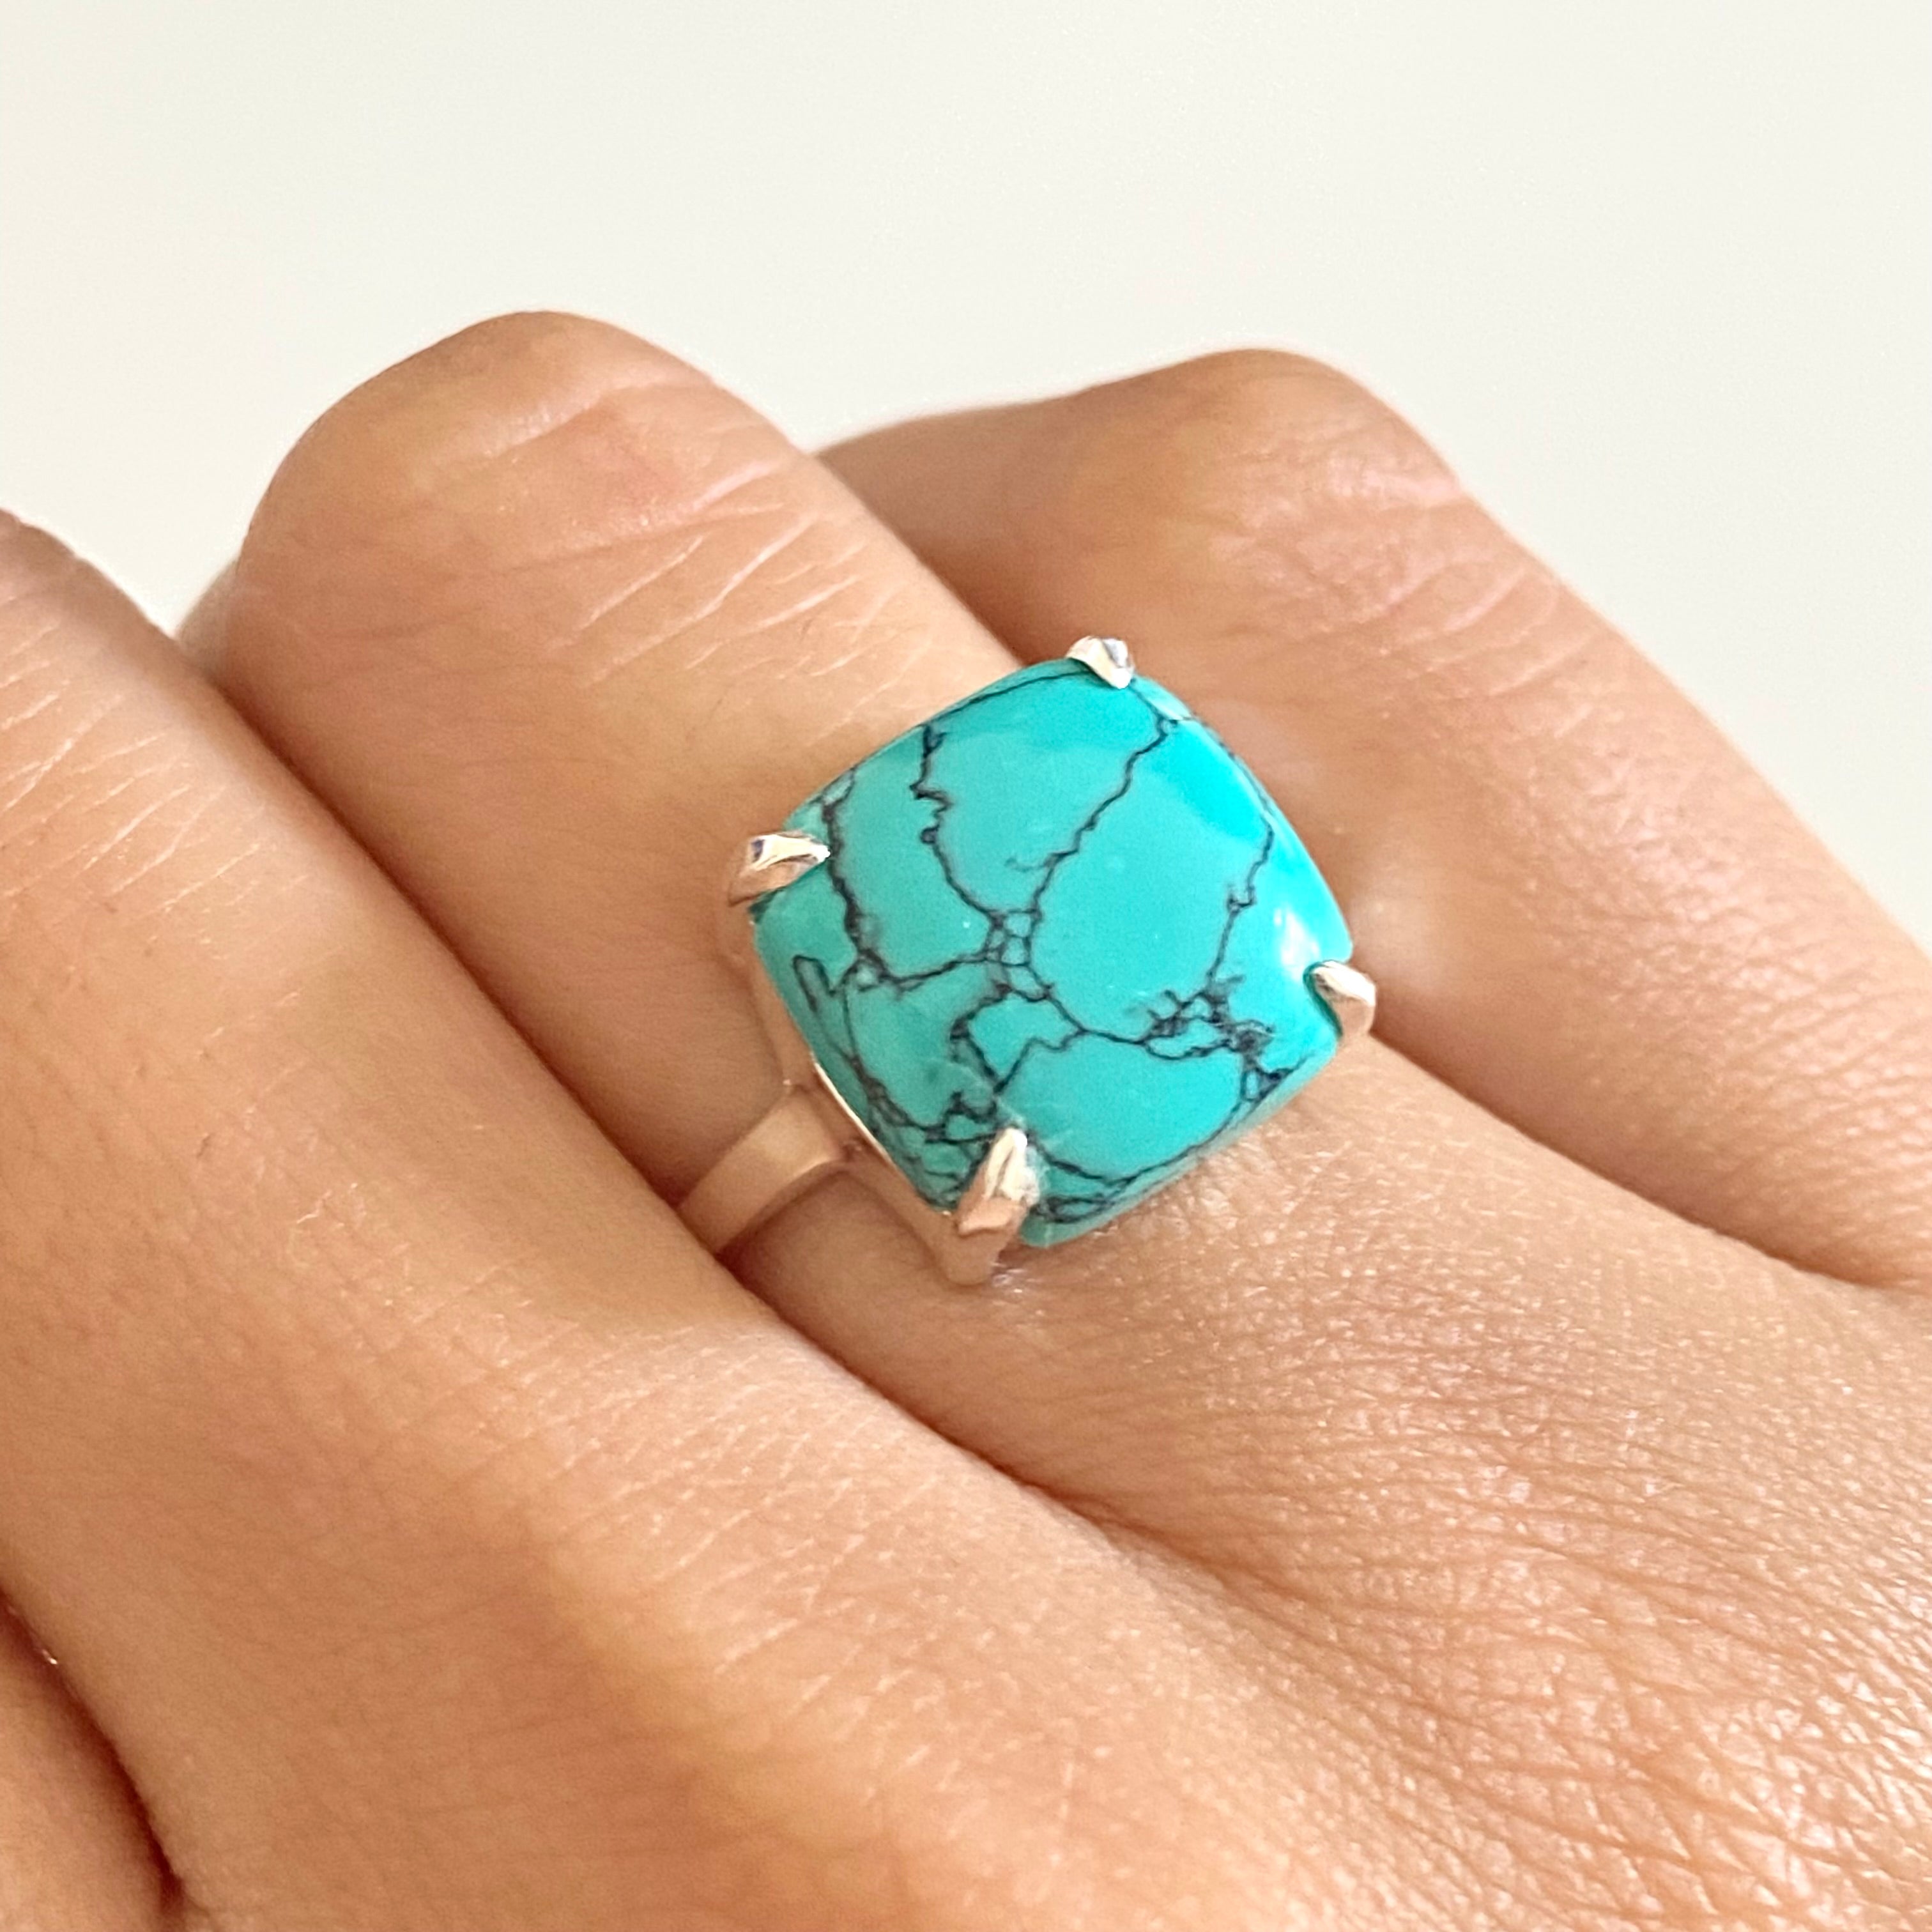 Square Cabochon Turquoise Ring in Sterling Silver